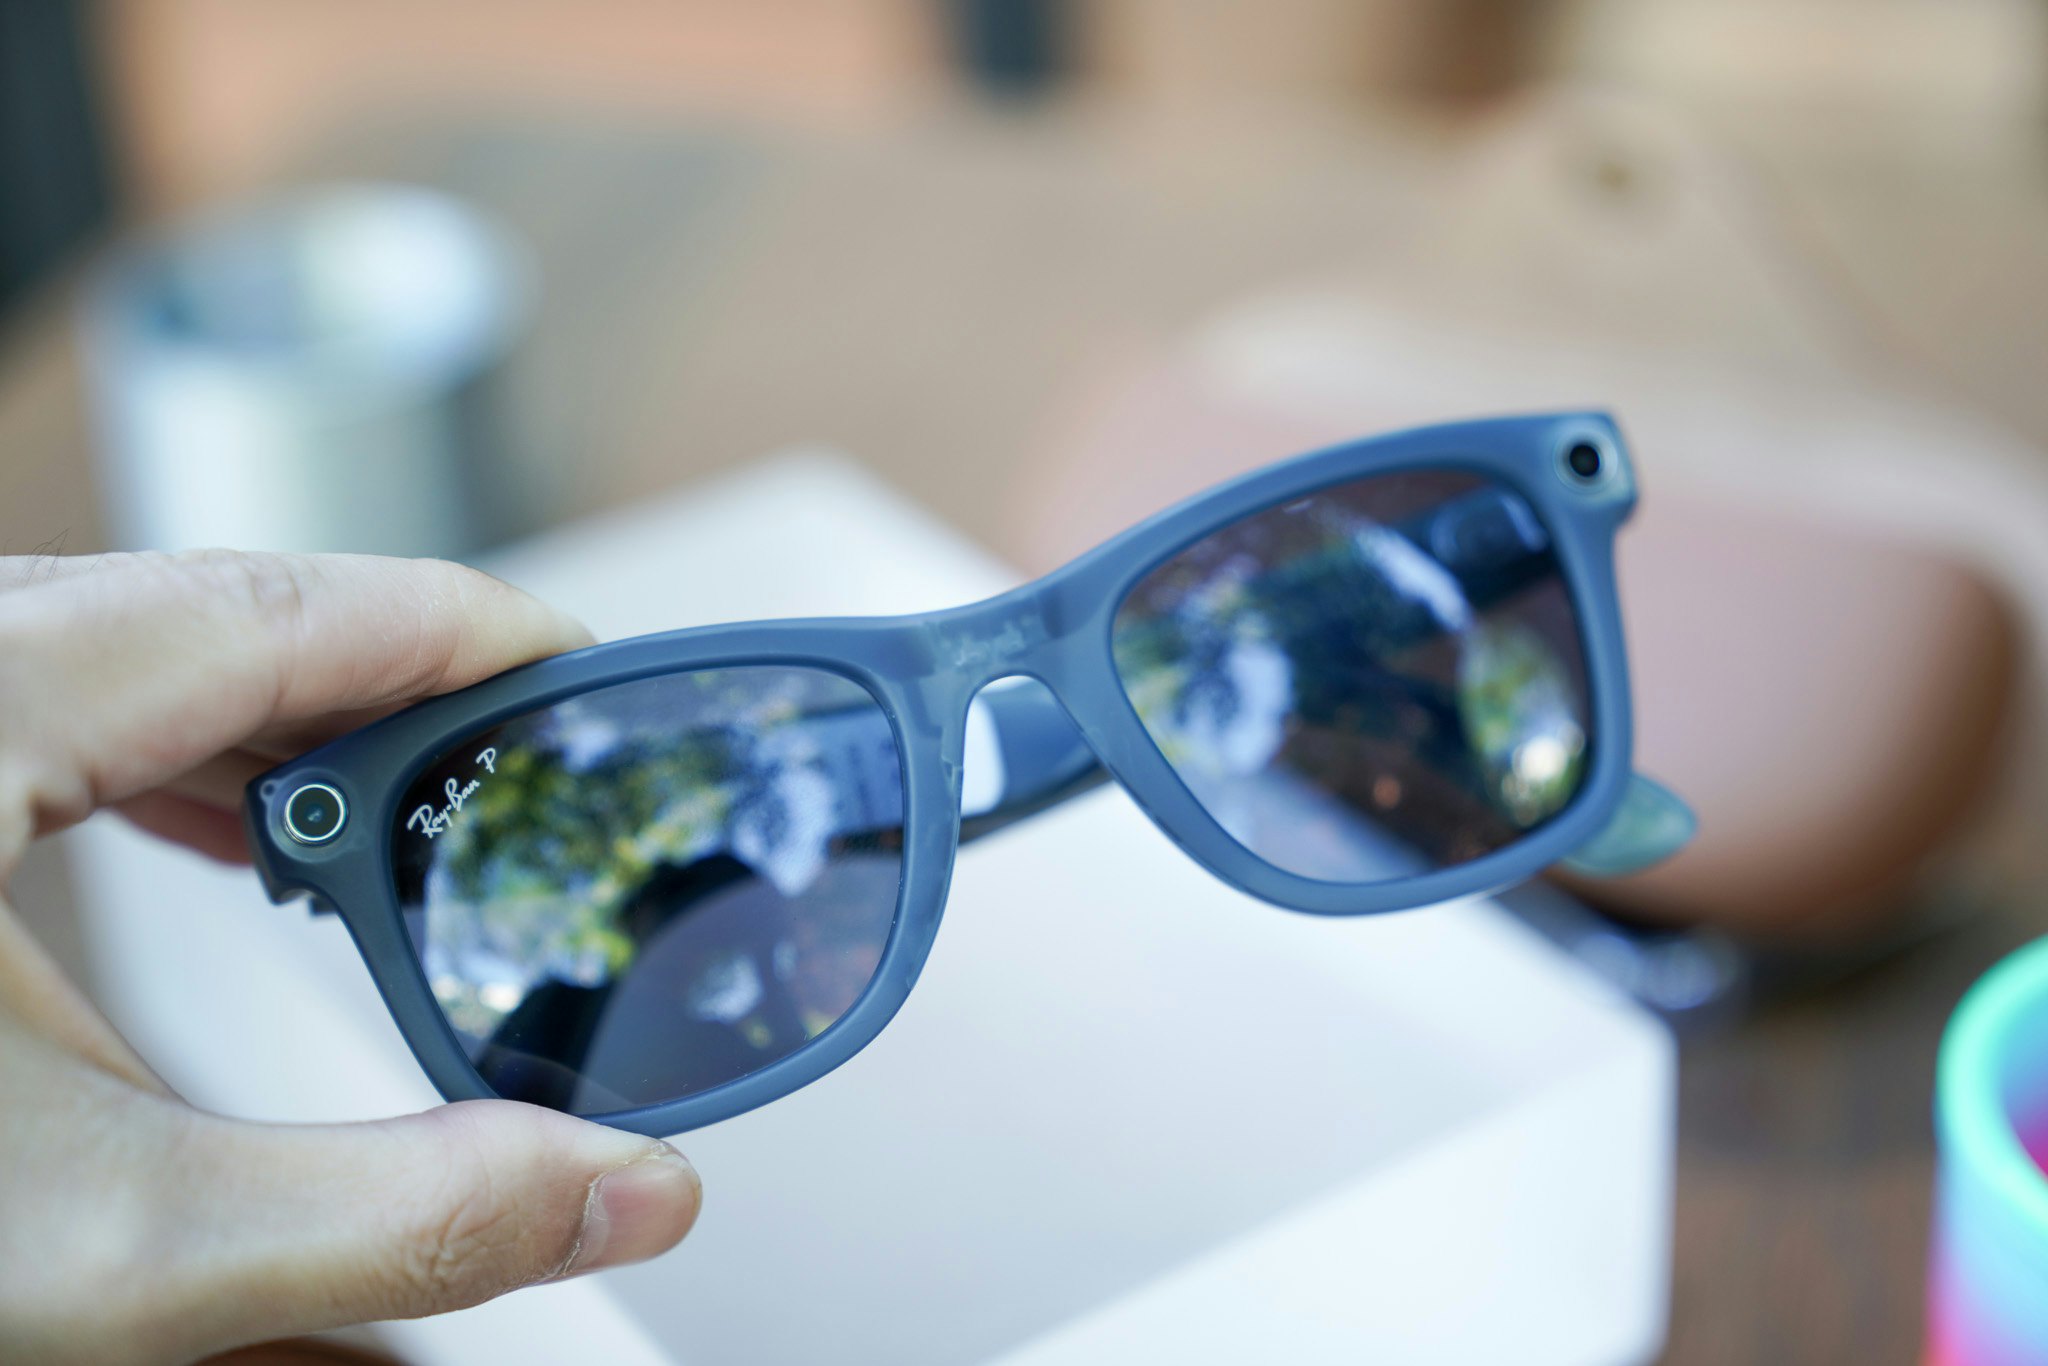 Ray-Ban Meta sunglasses have 'influencer' written all over them